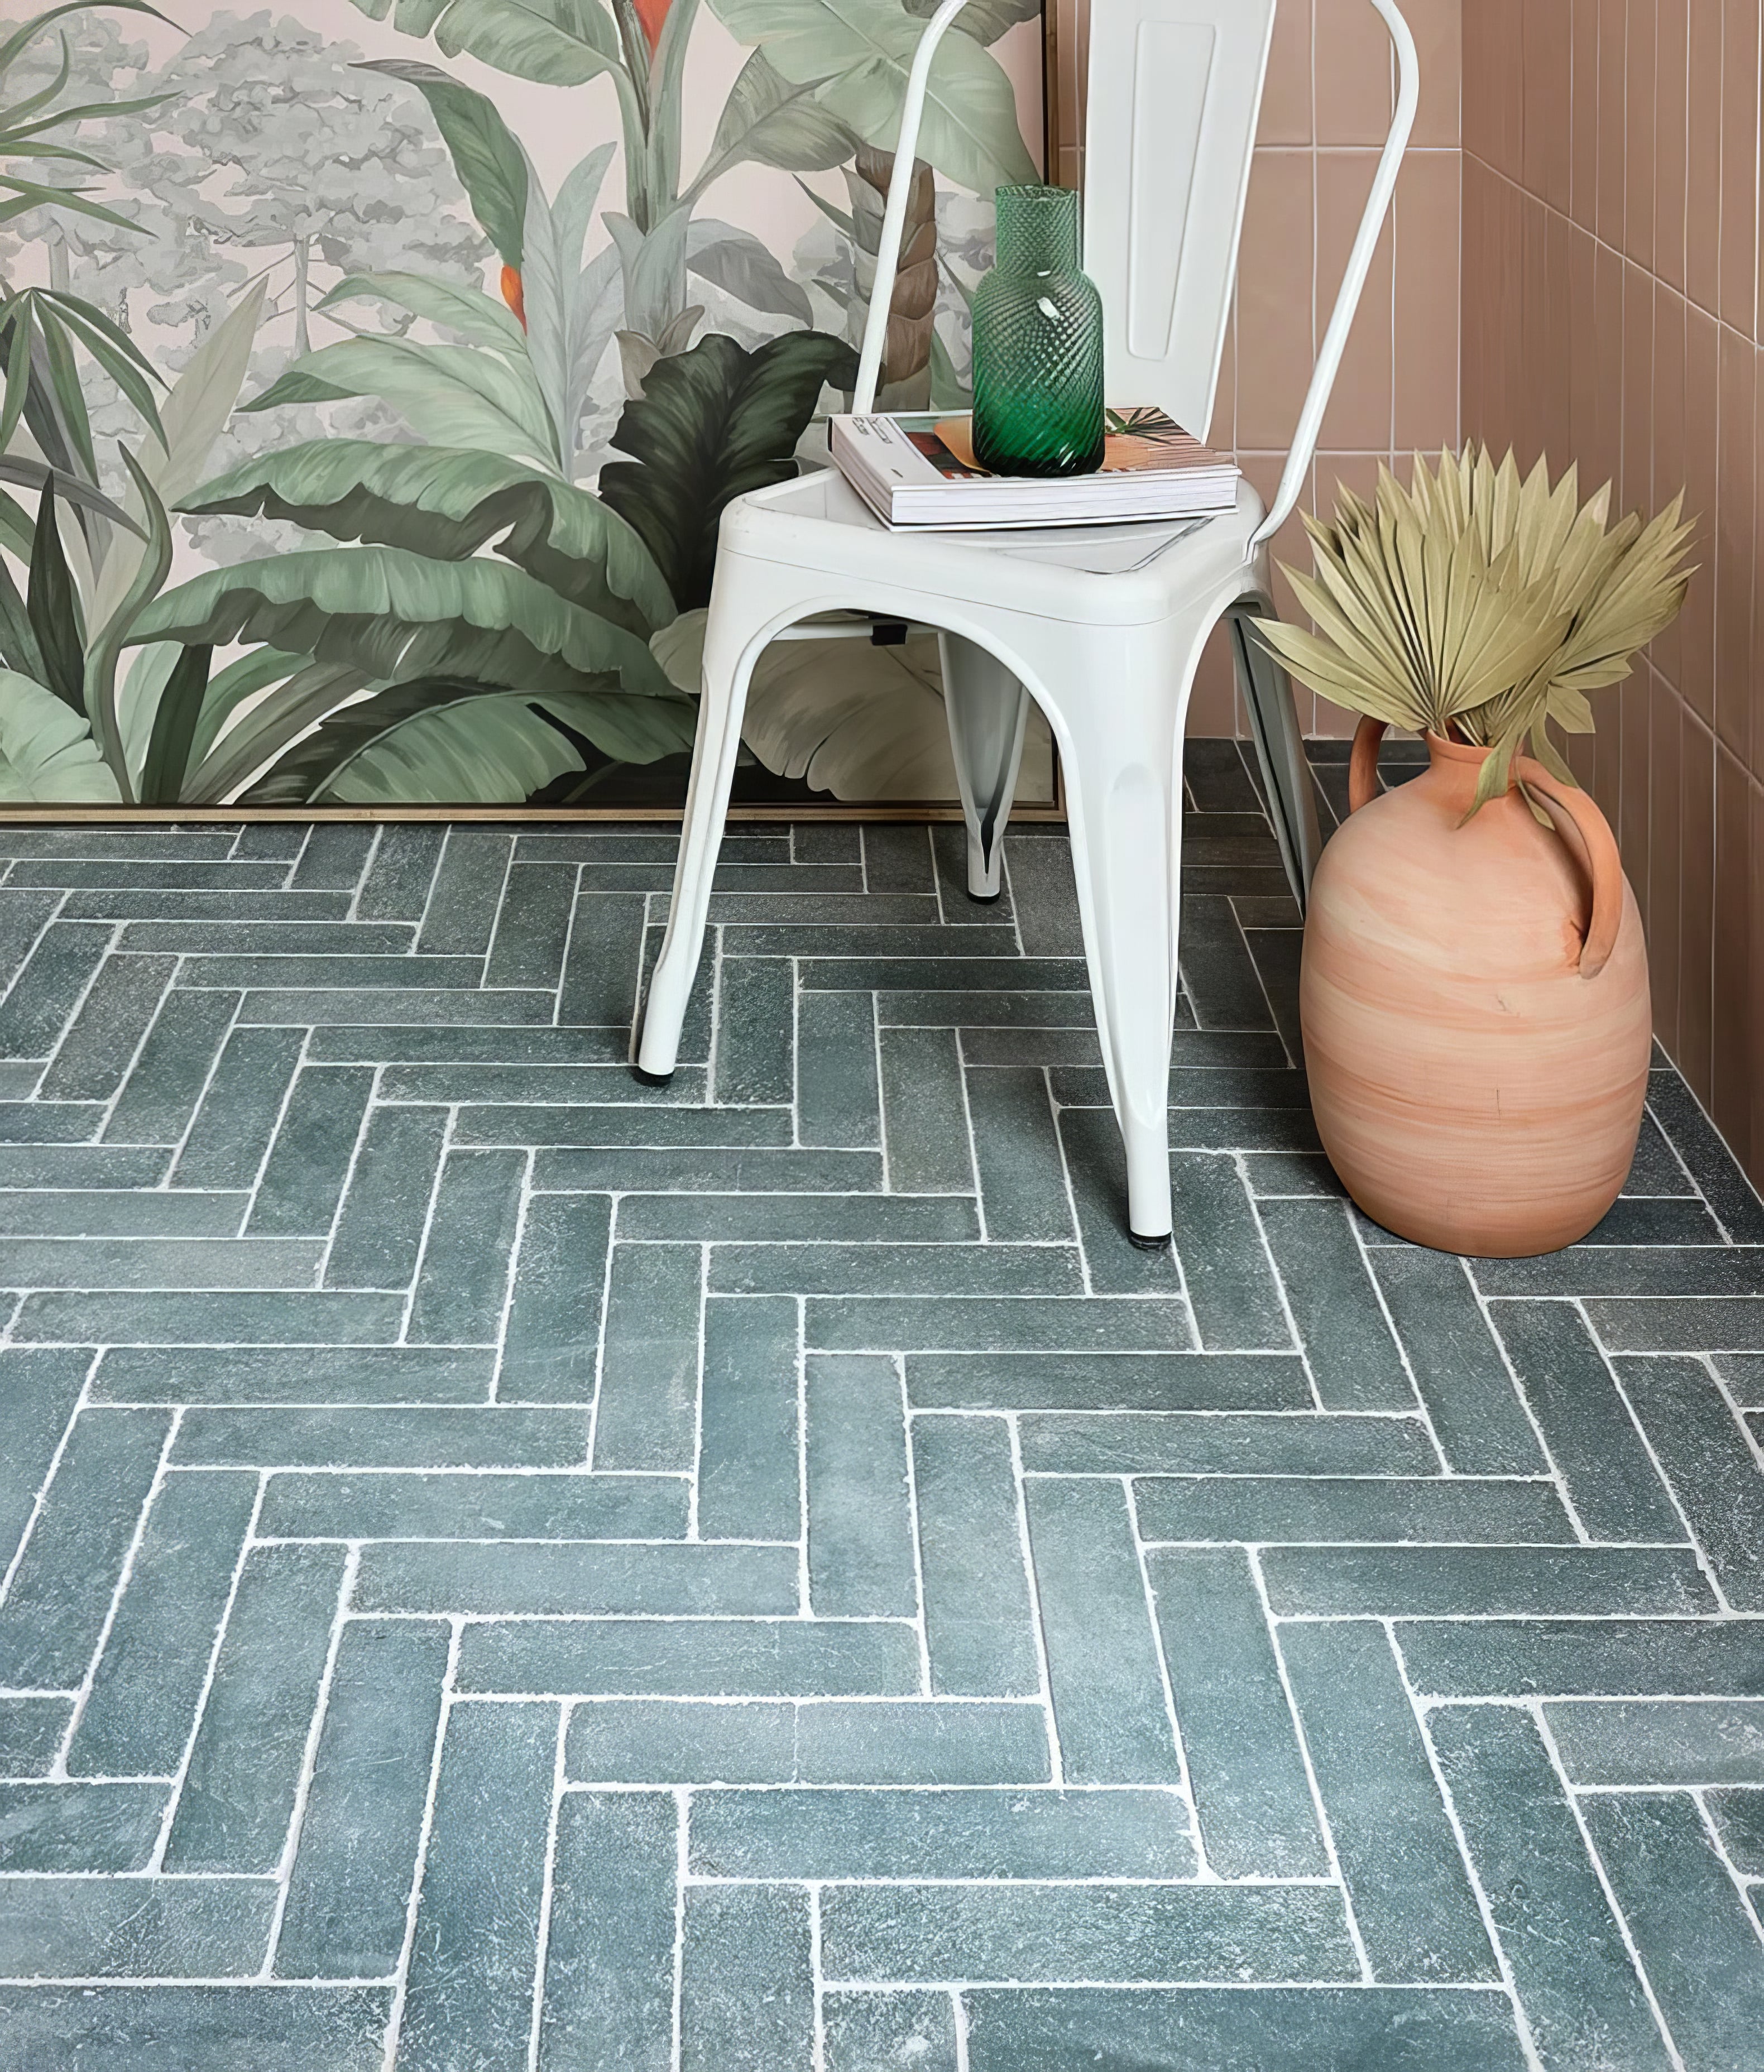 Reform Composite Stone Tumbled Emerald Green - Hyperion Tiles